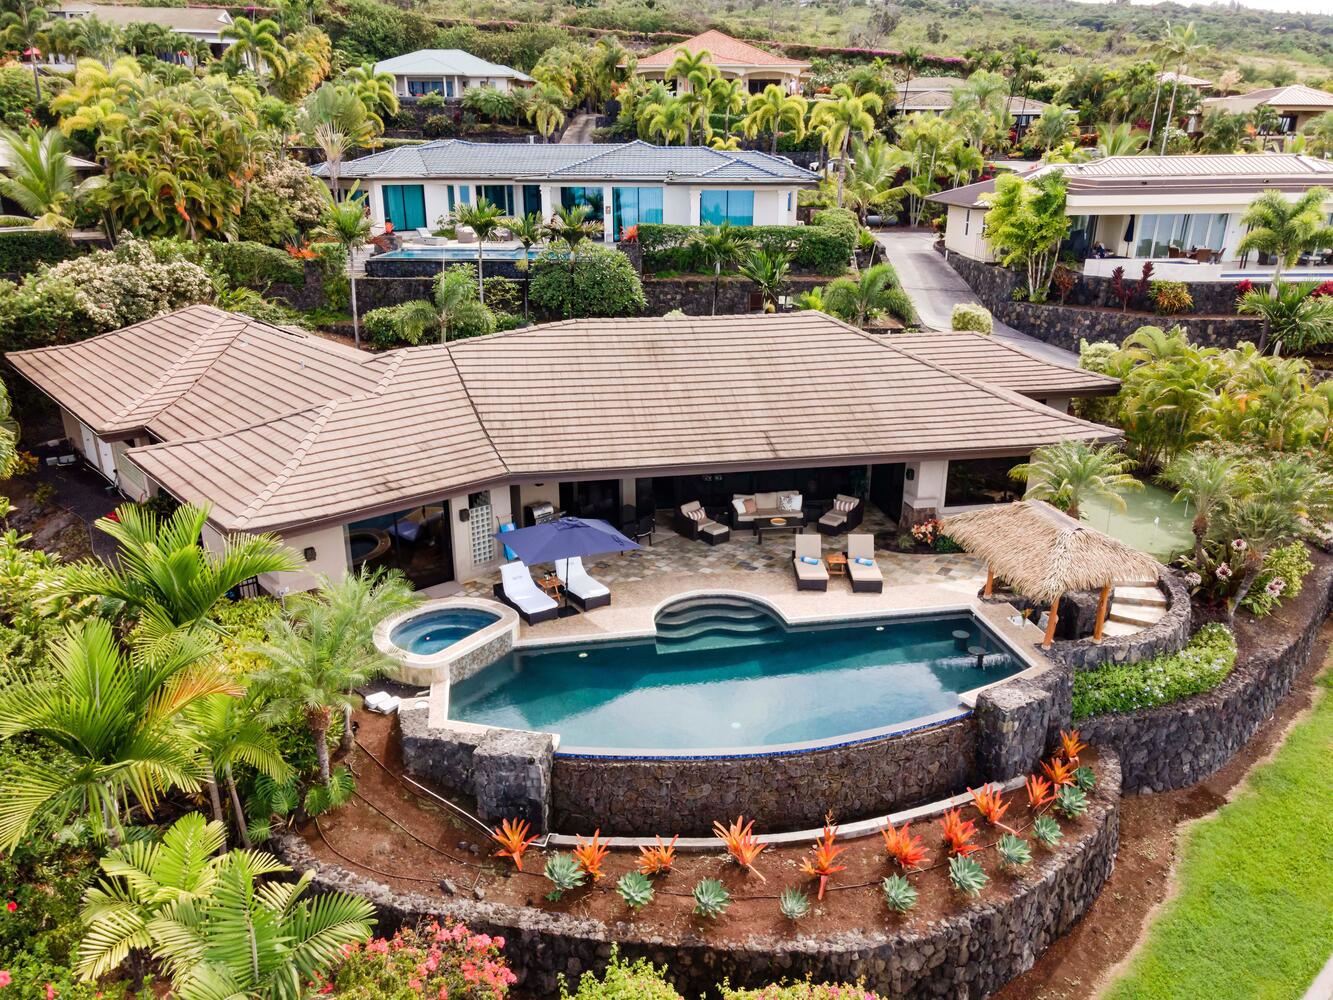 Kailua Kona Vacation Rentals, Island Oasis - Beautiful infinity edge pool offers easy entry with steps leading in!